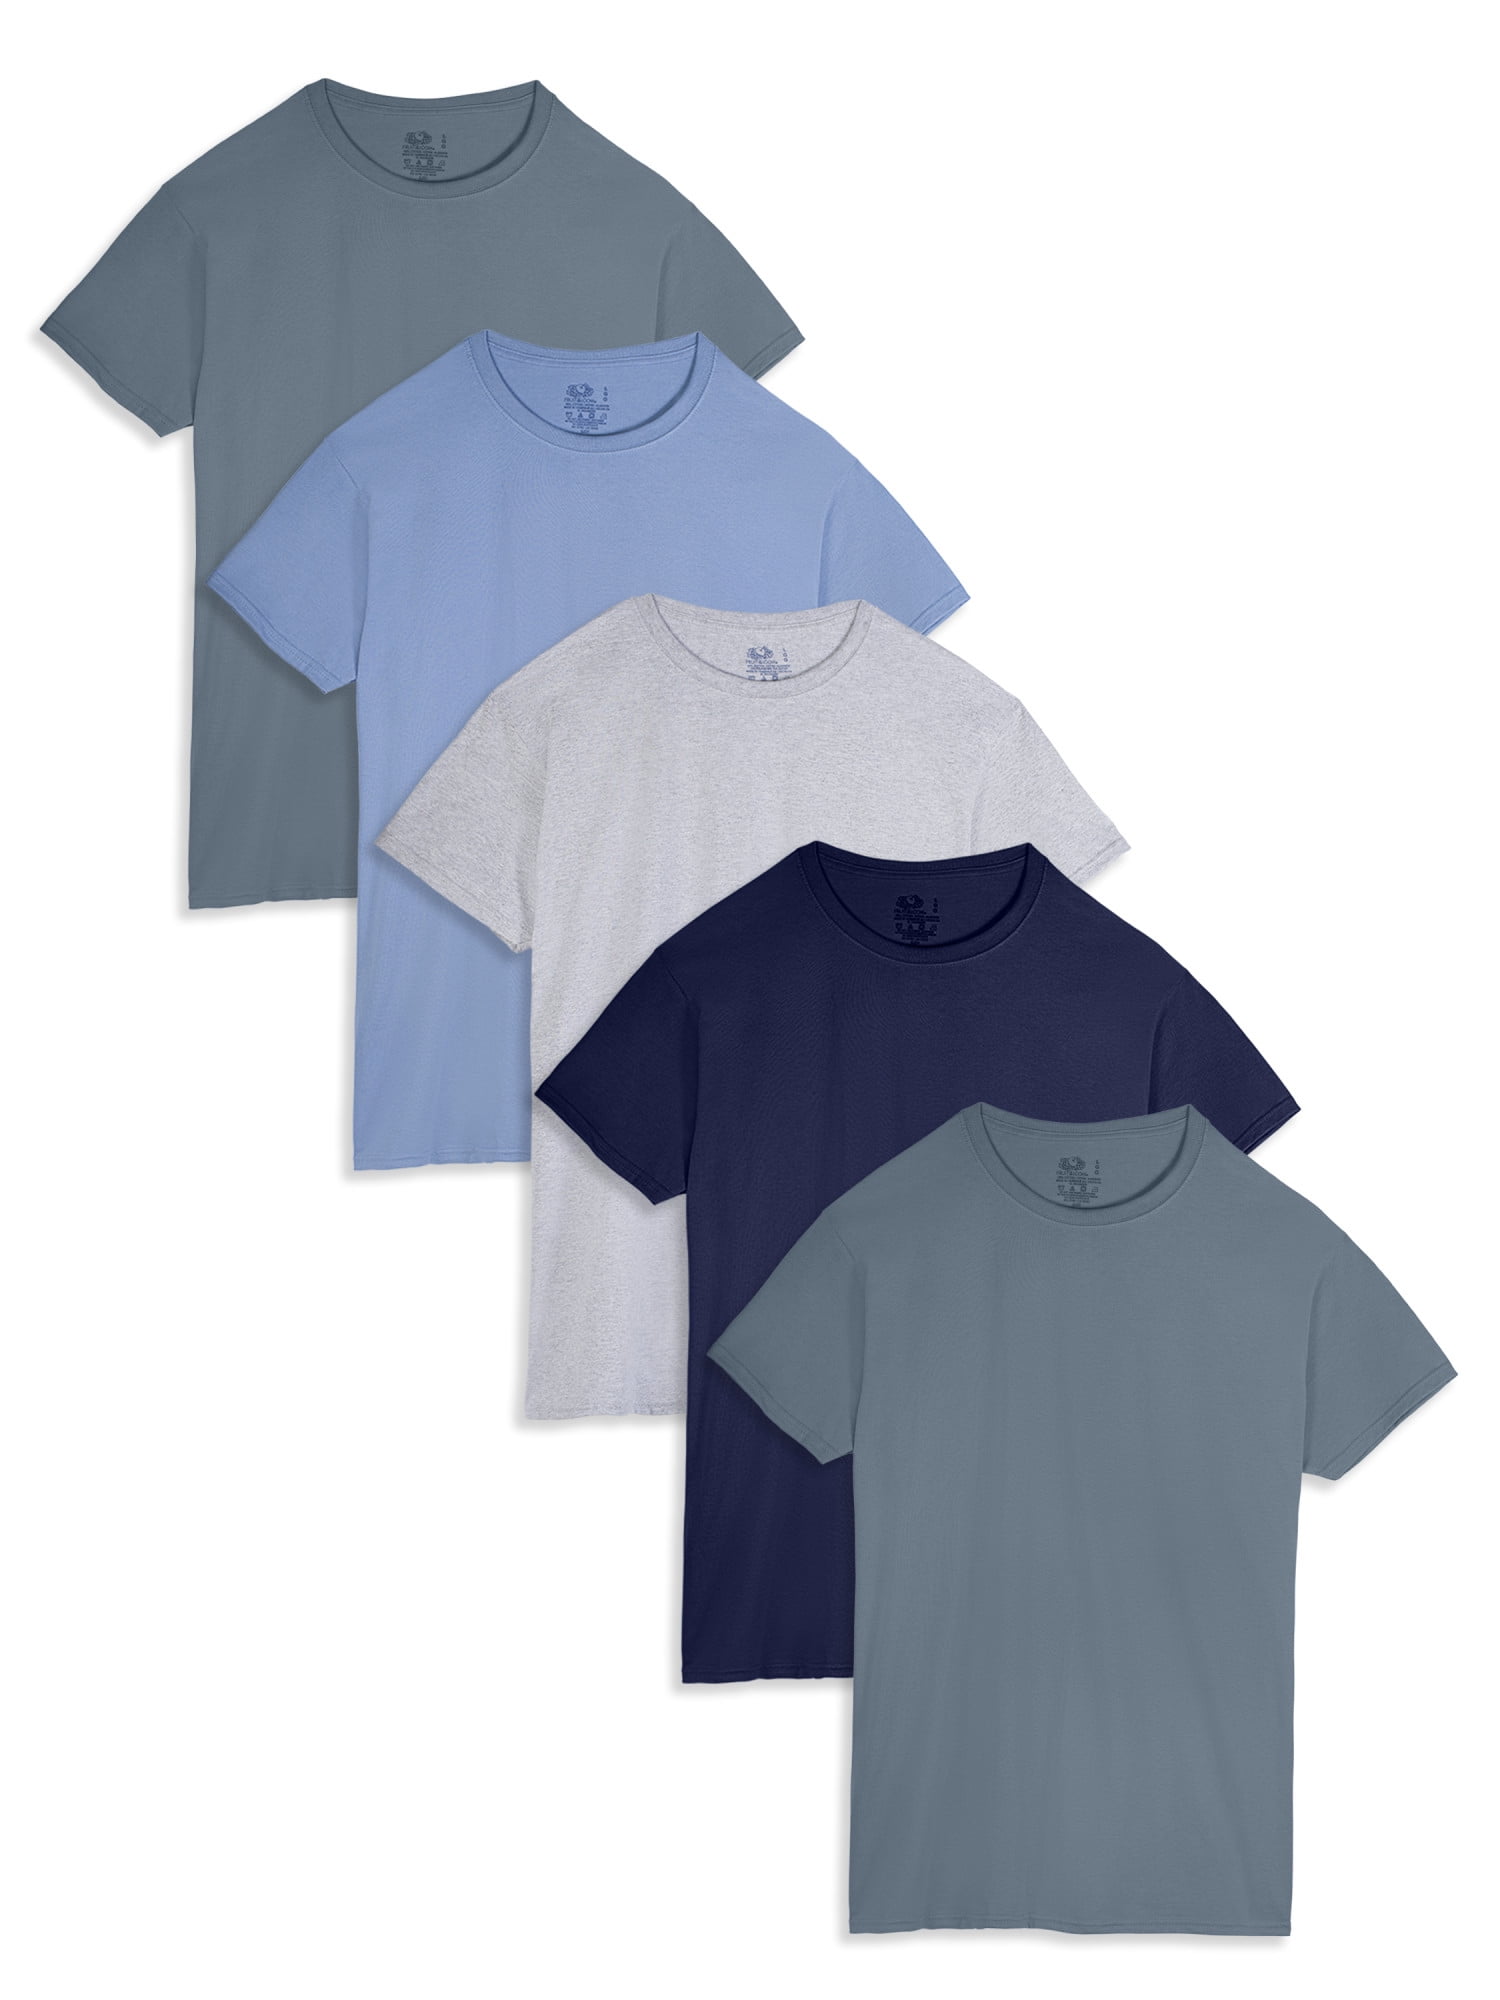 Fruit of the Loom Mens Crew T-Shirt 2 Pack 